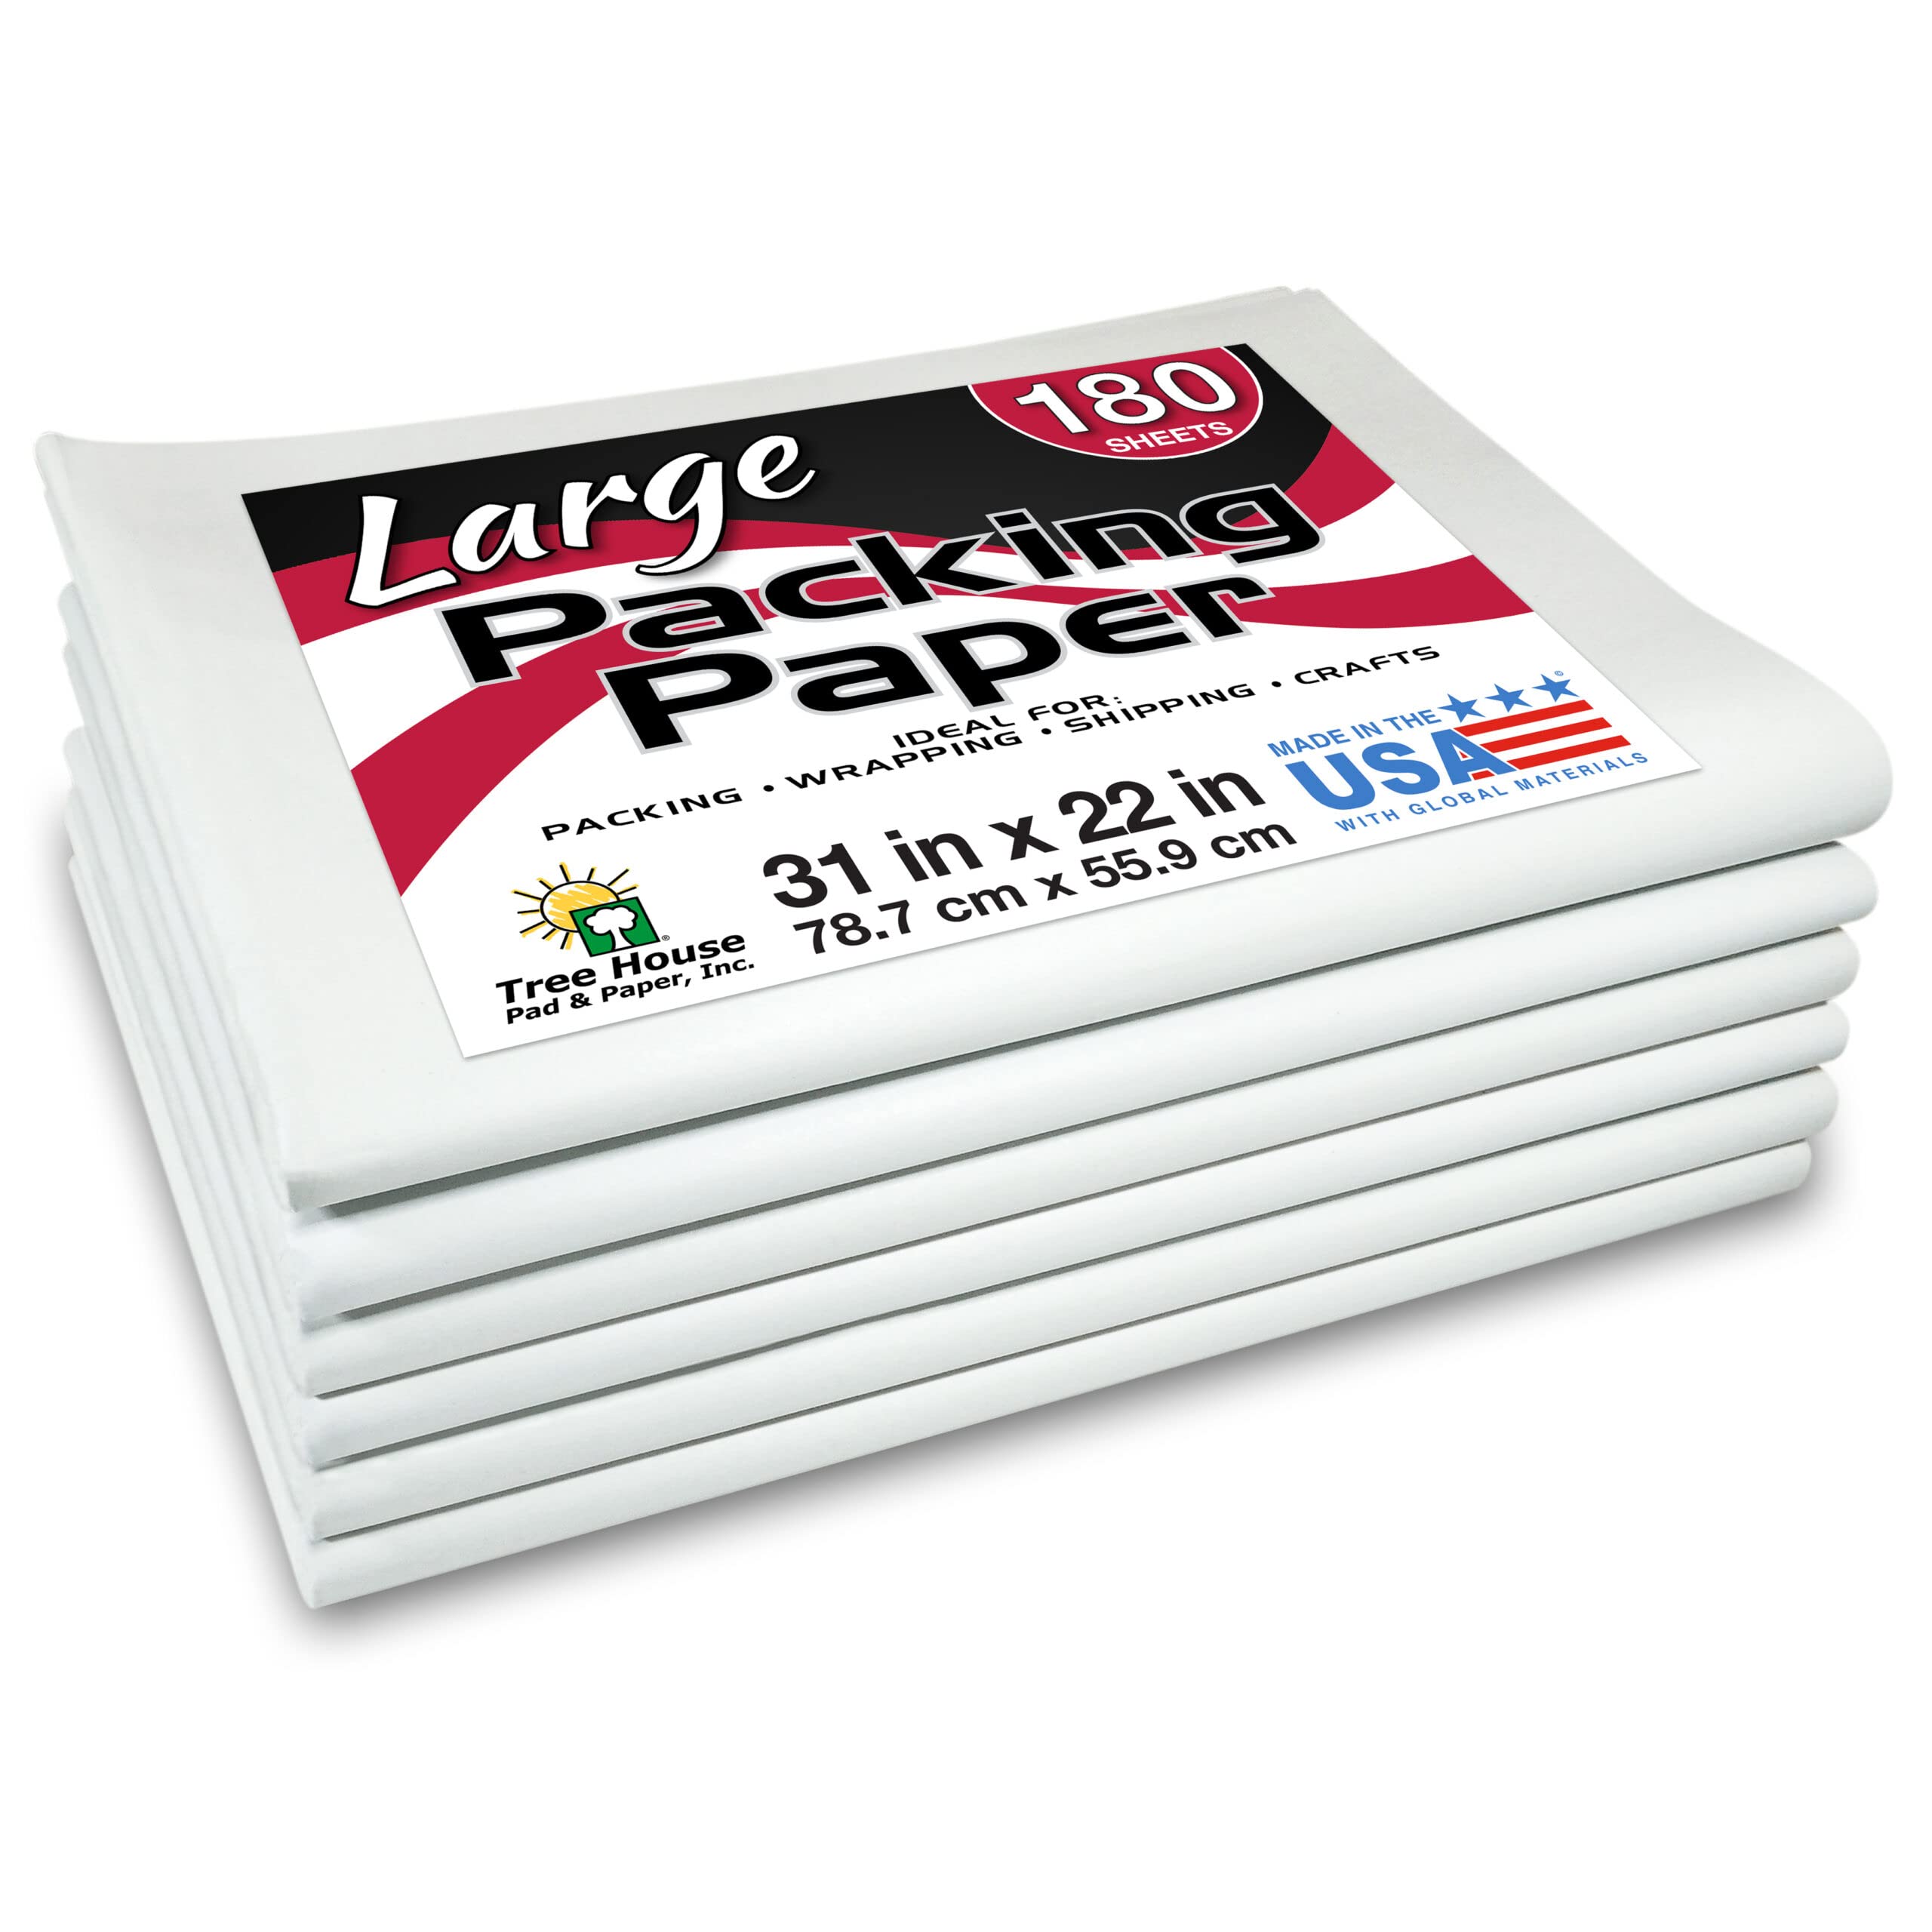 Packing Paper LARGE Sheets for Moving & Shipping, 180 Sheets of Newsprint,  31x22, Made in the USA